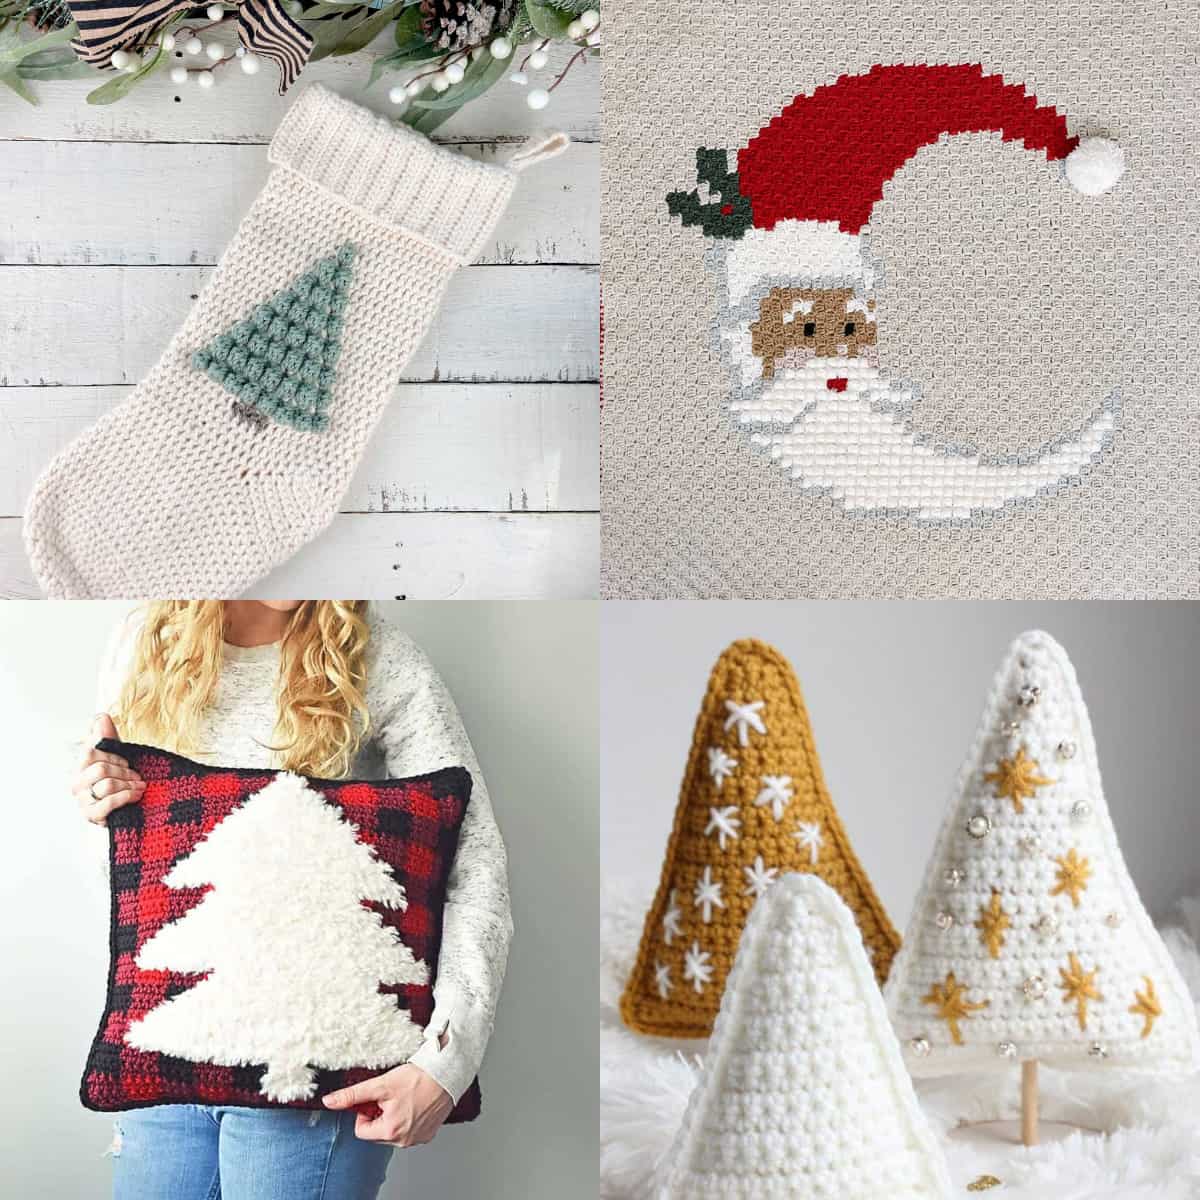 35 Best Free Christmas Crochet Patterns to Make This Year » Make & Do Crew